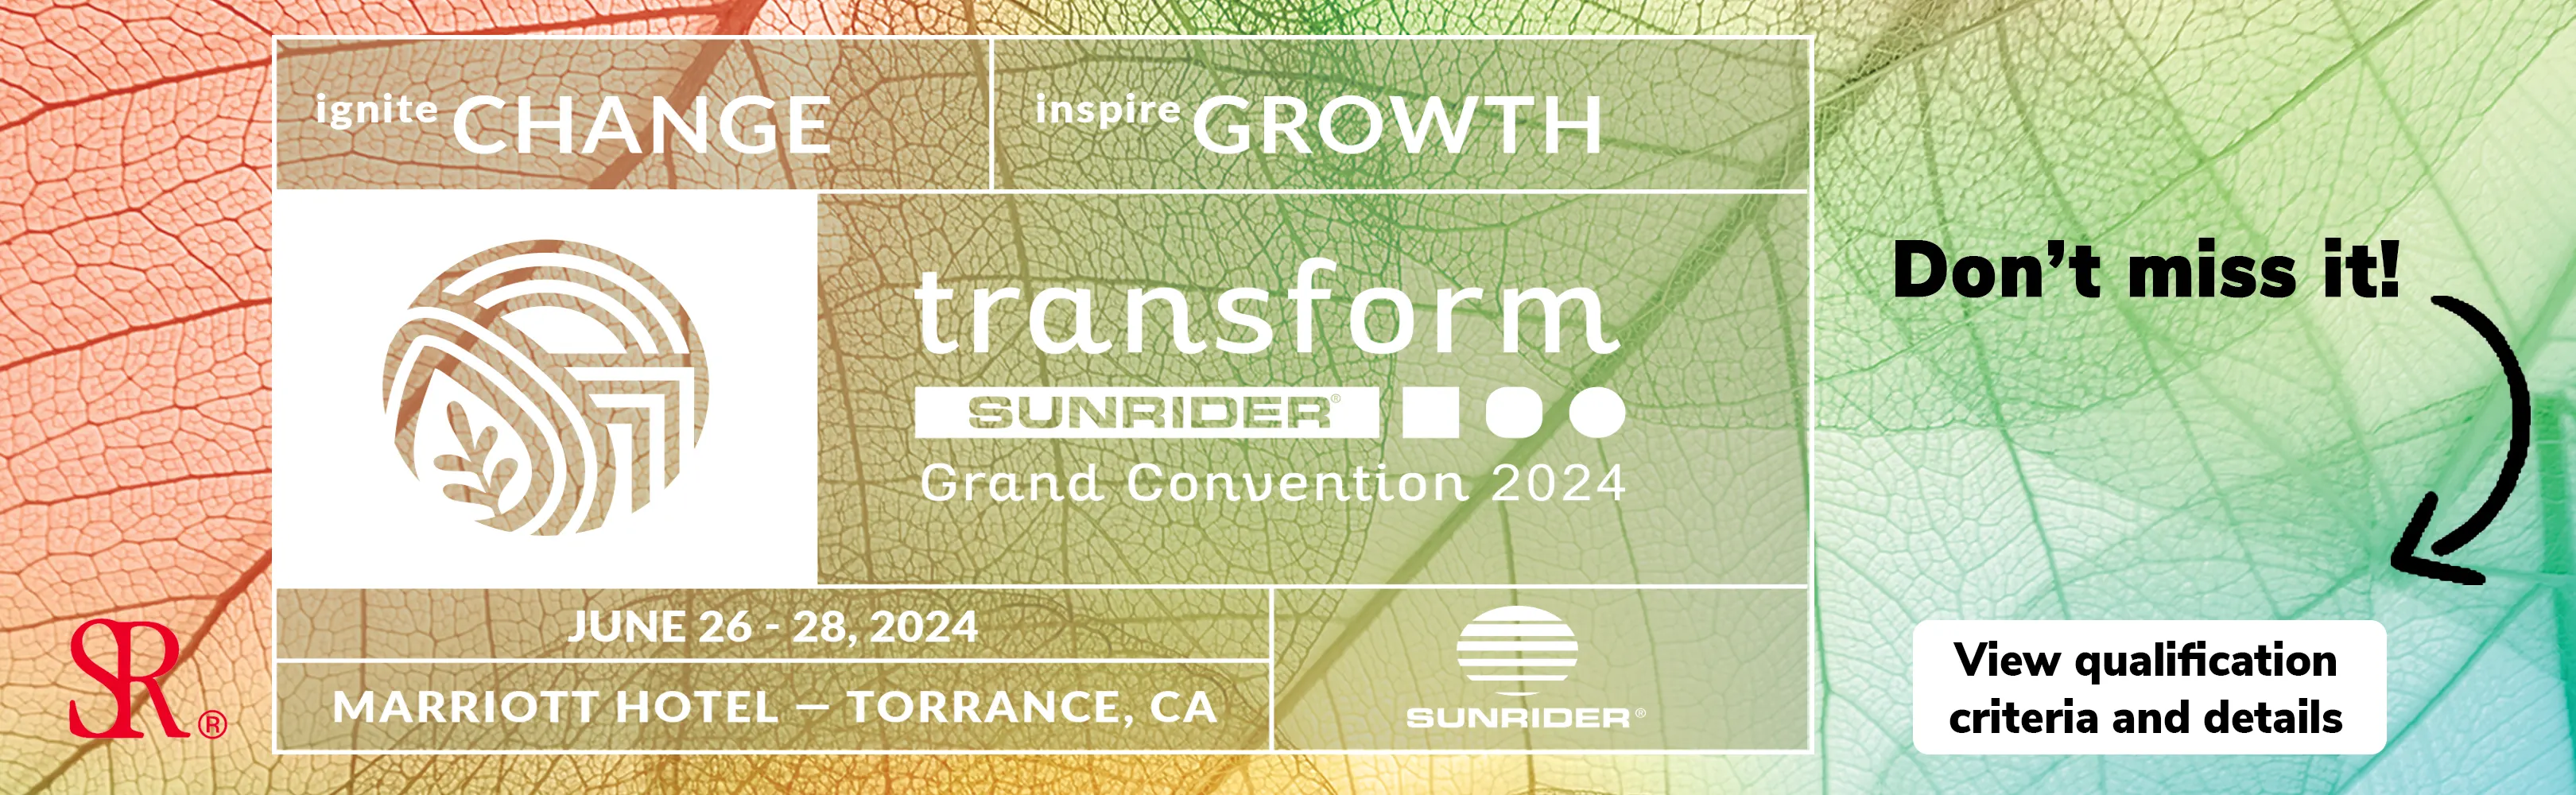 [HU] 2024 Grand Convention Banner ENG